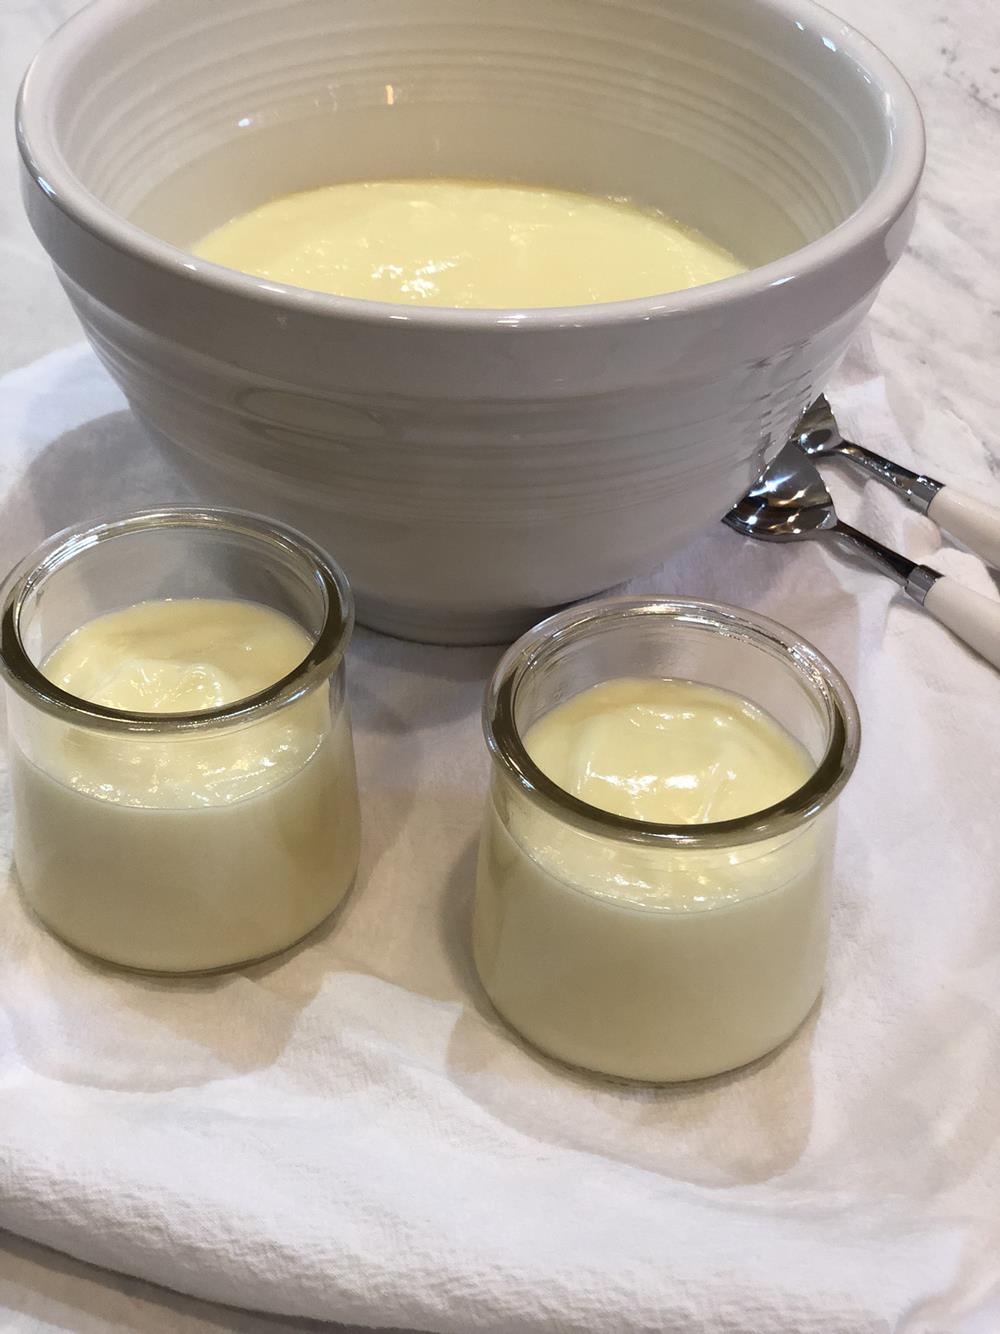 lemon pudding in white bowl with cups and spoons